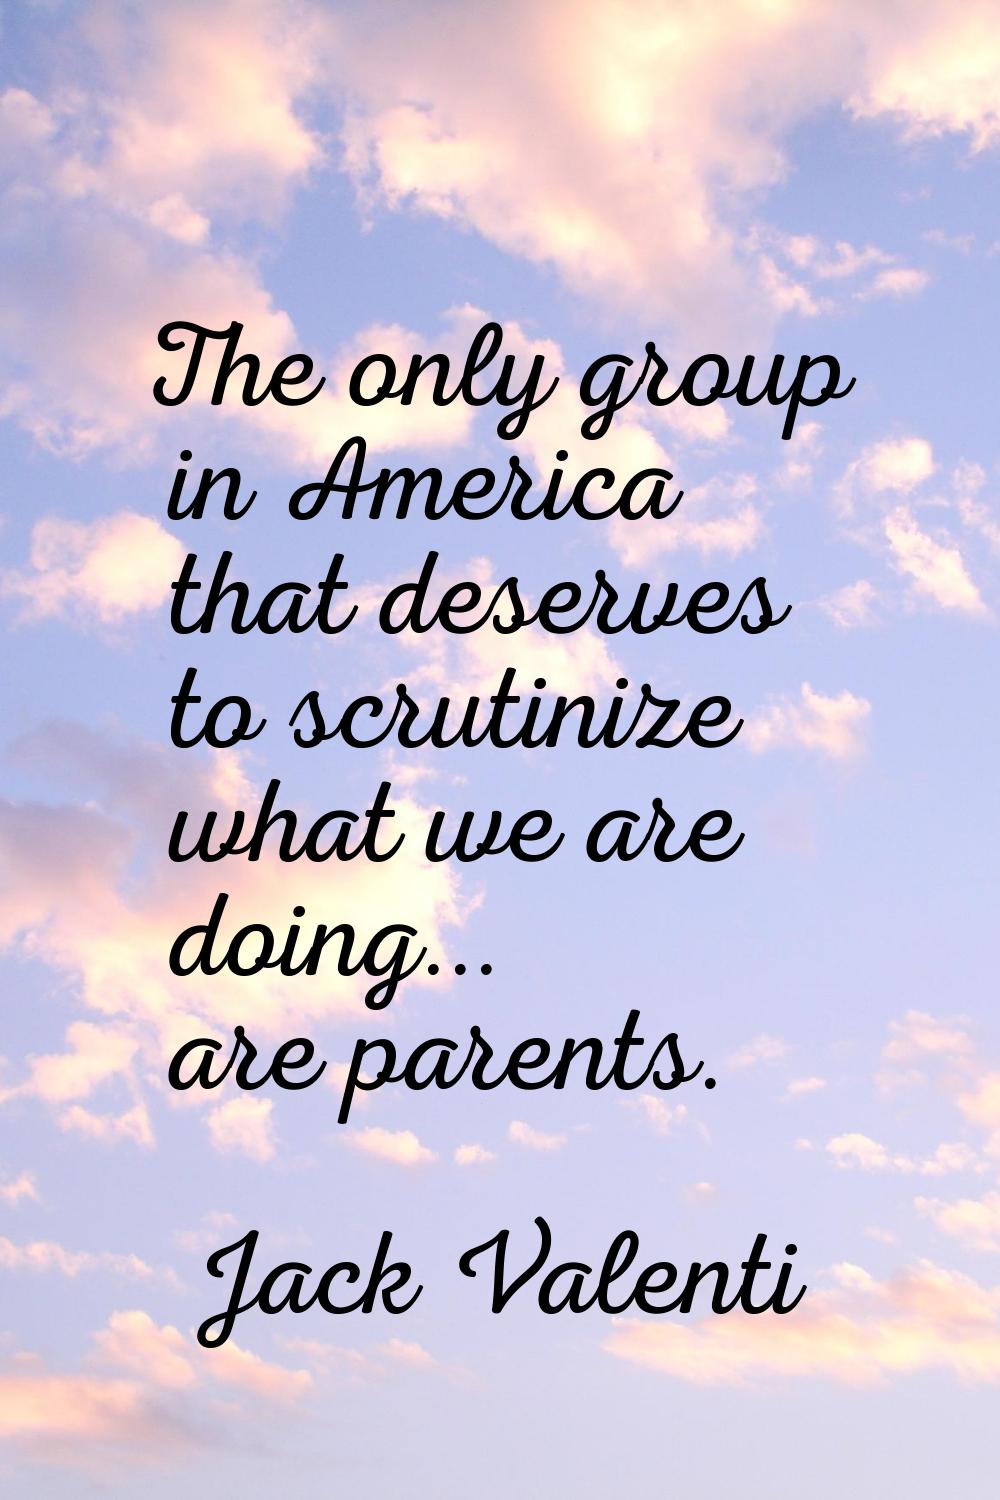 The only group in America that deserves to scrutinize what we are doing... are parents.